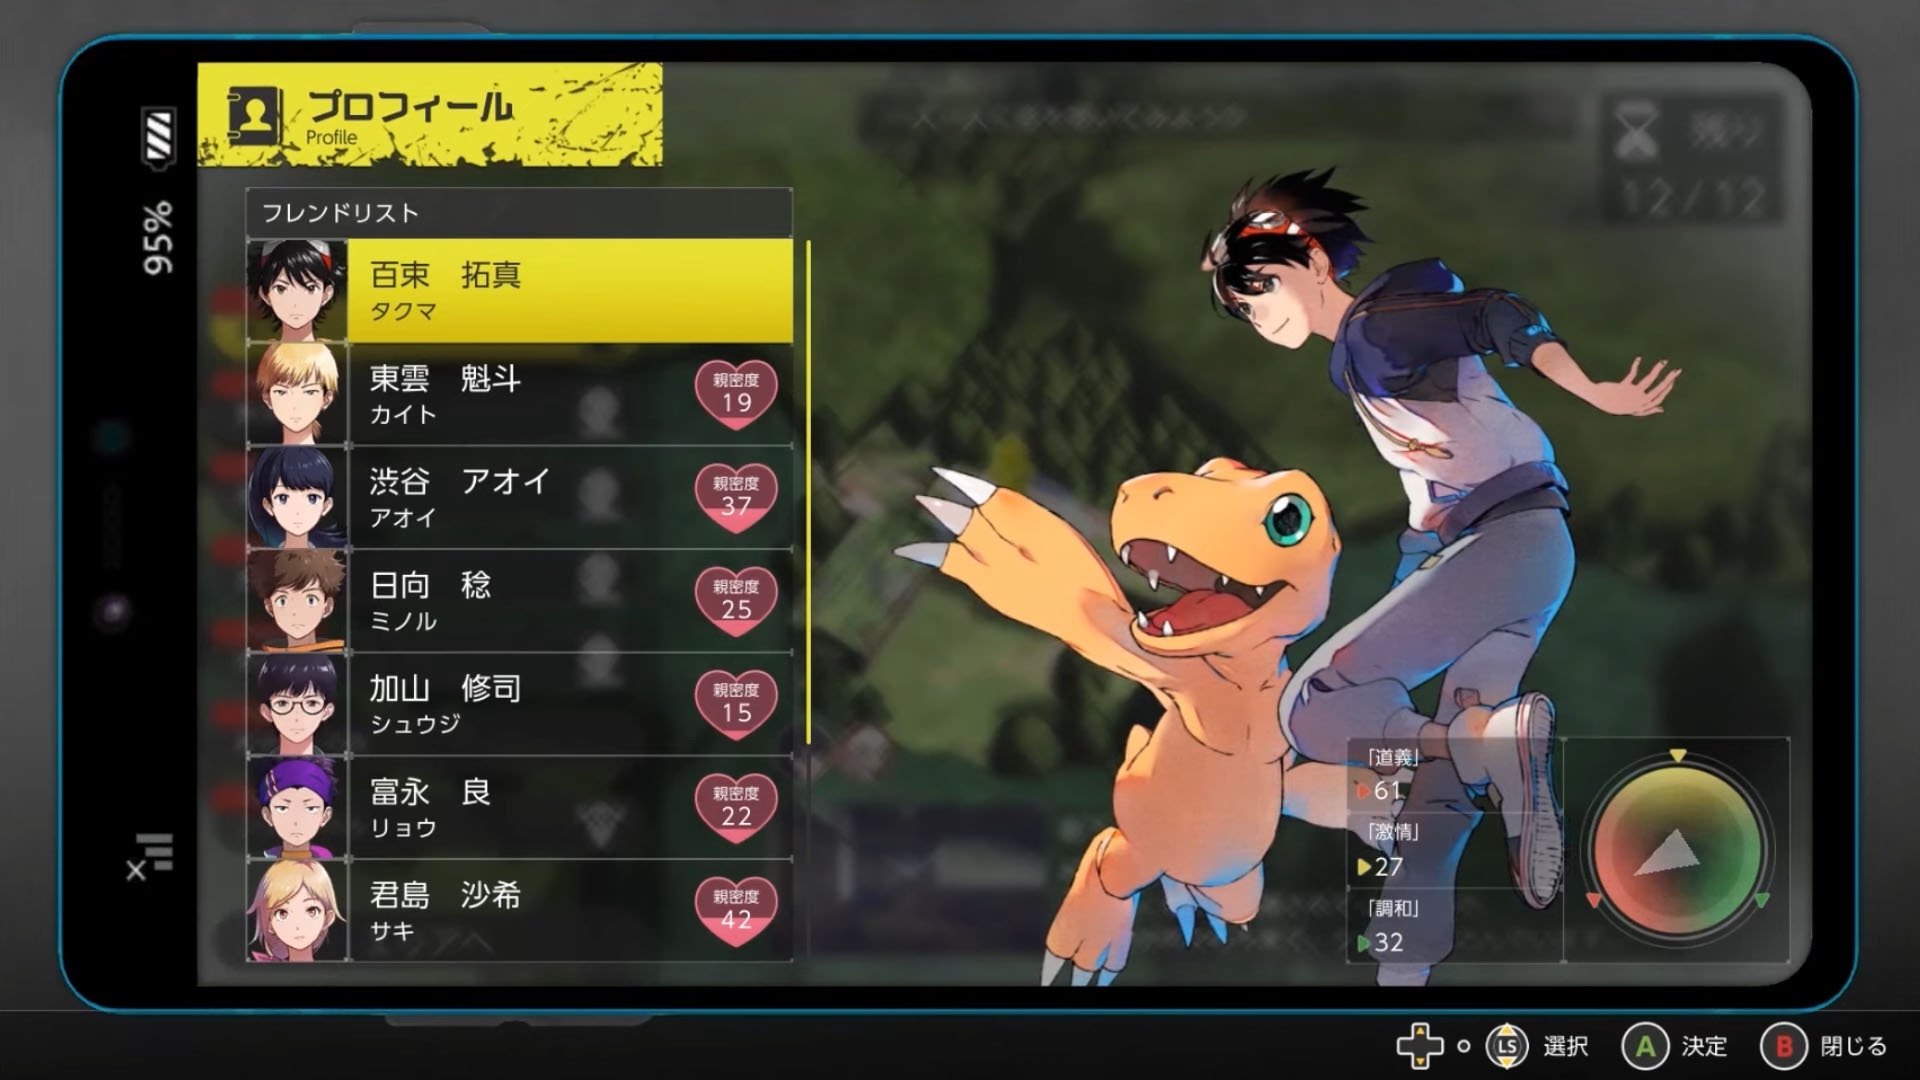 Digimon Survive 'Characters' trailer; producer discusses more - Gematsu